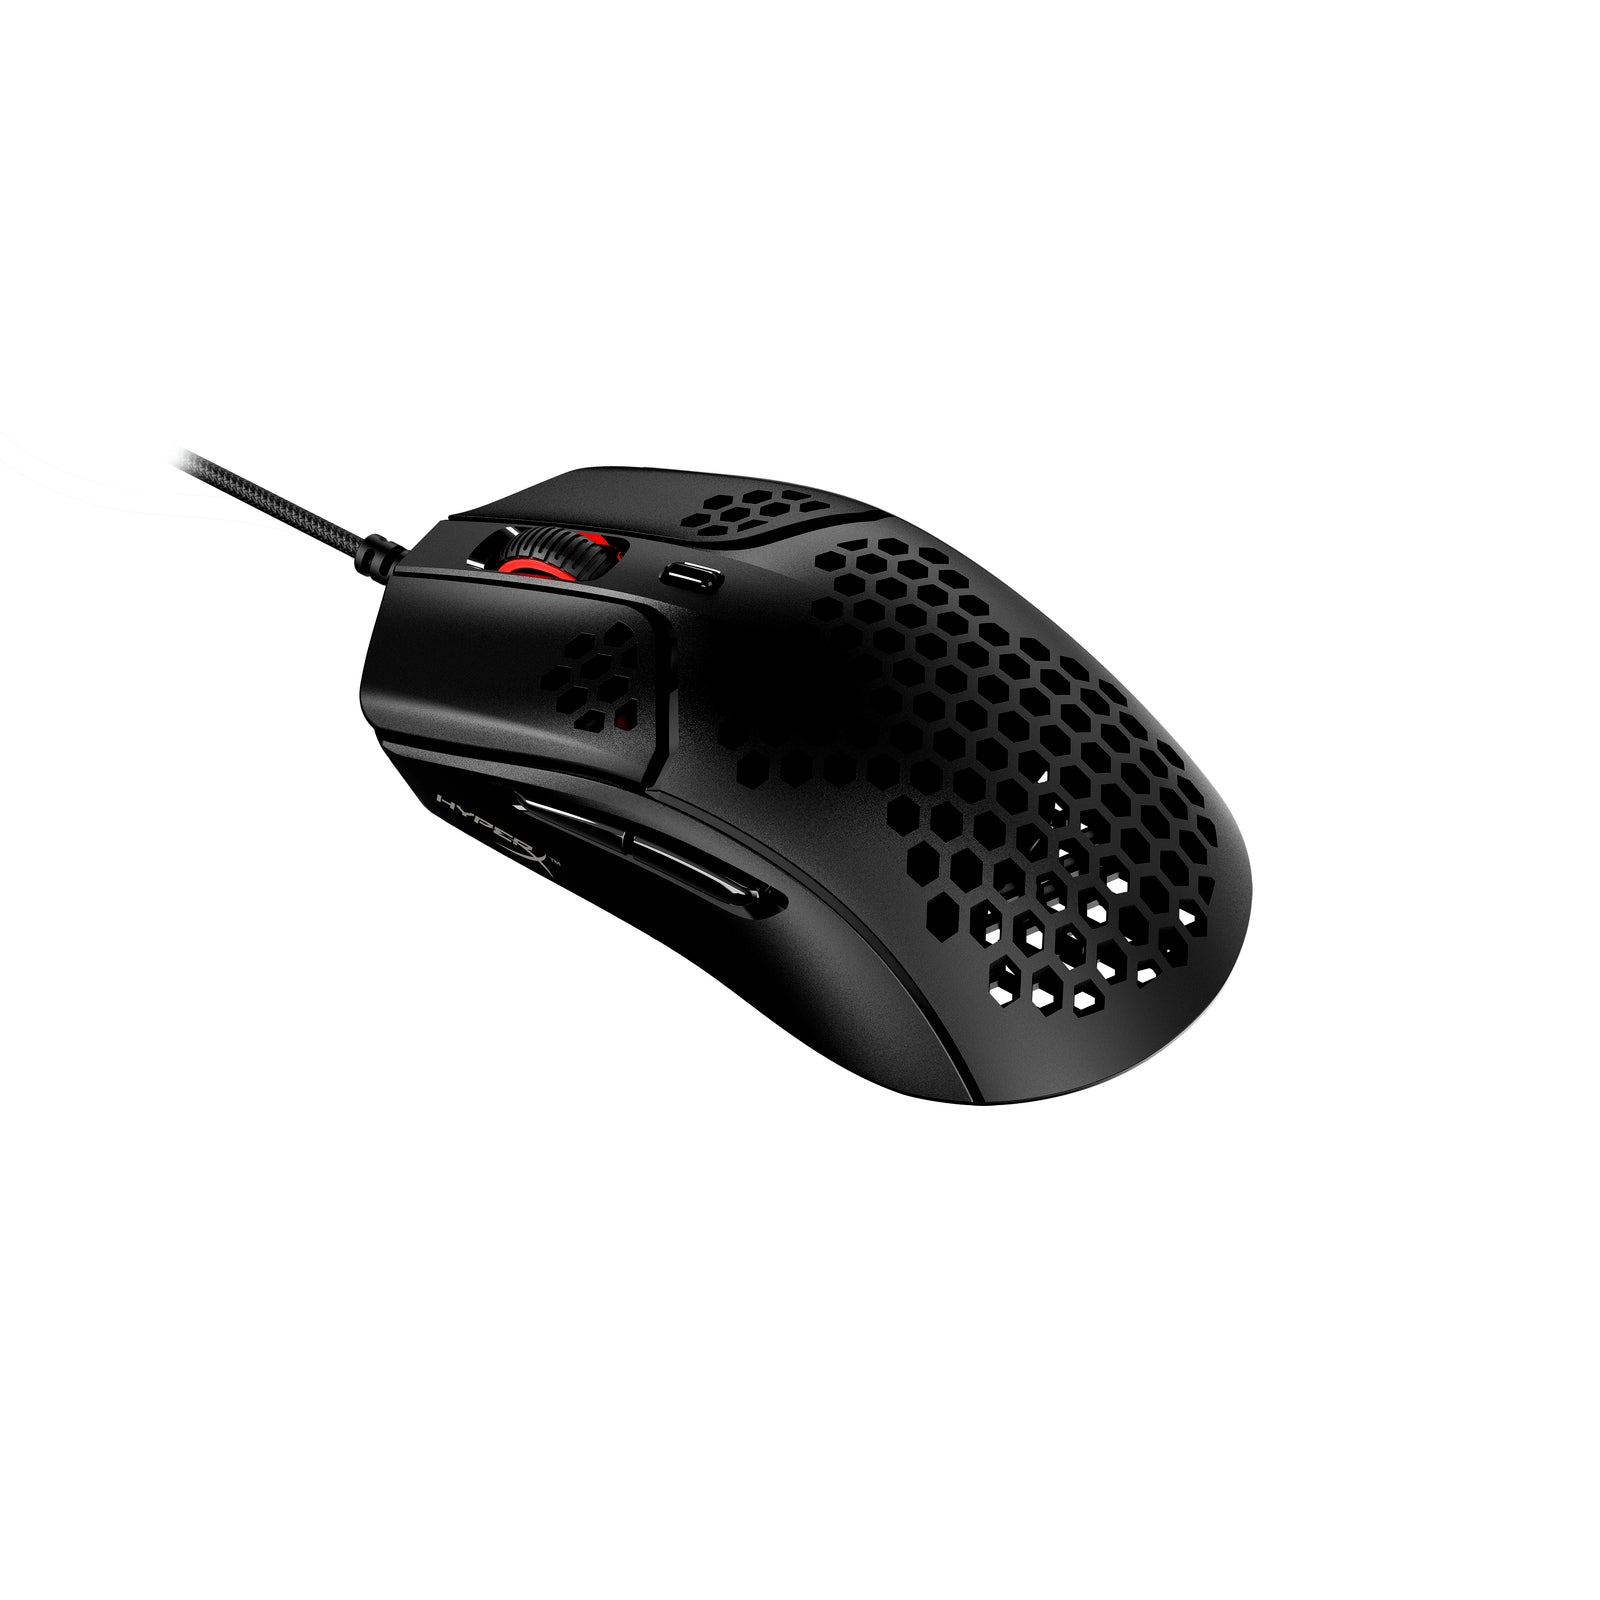 HyperX Pulsefire Haste Black Gaming Mouse Back Angled View